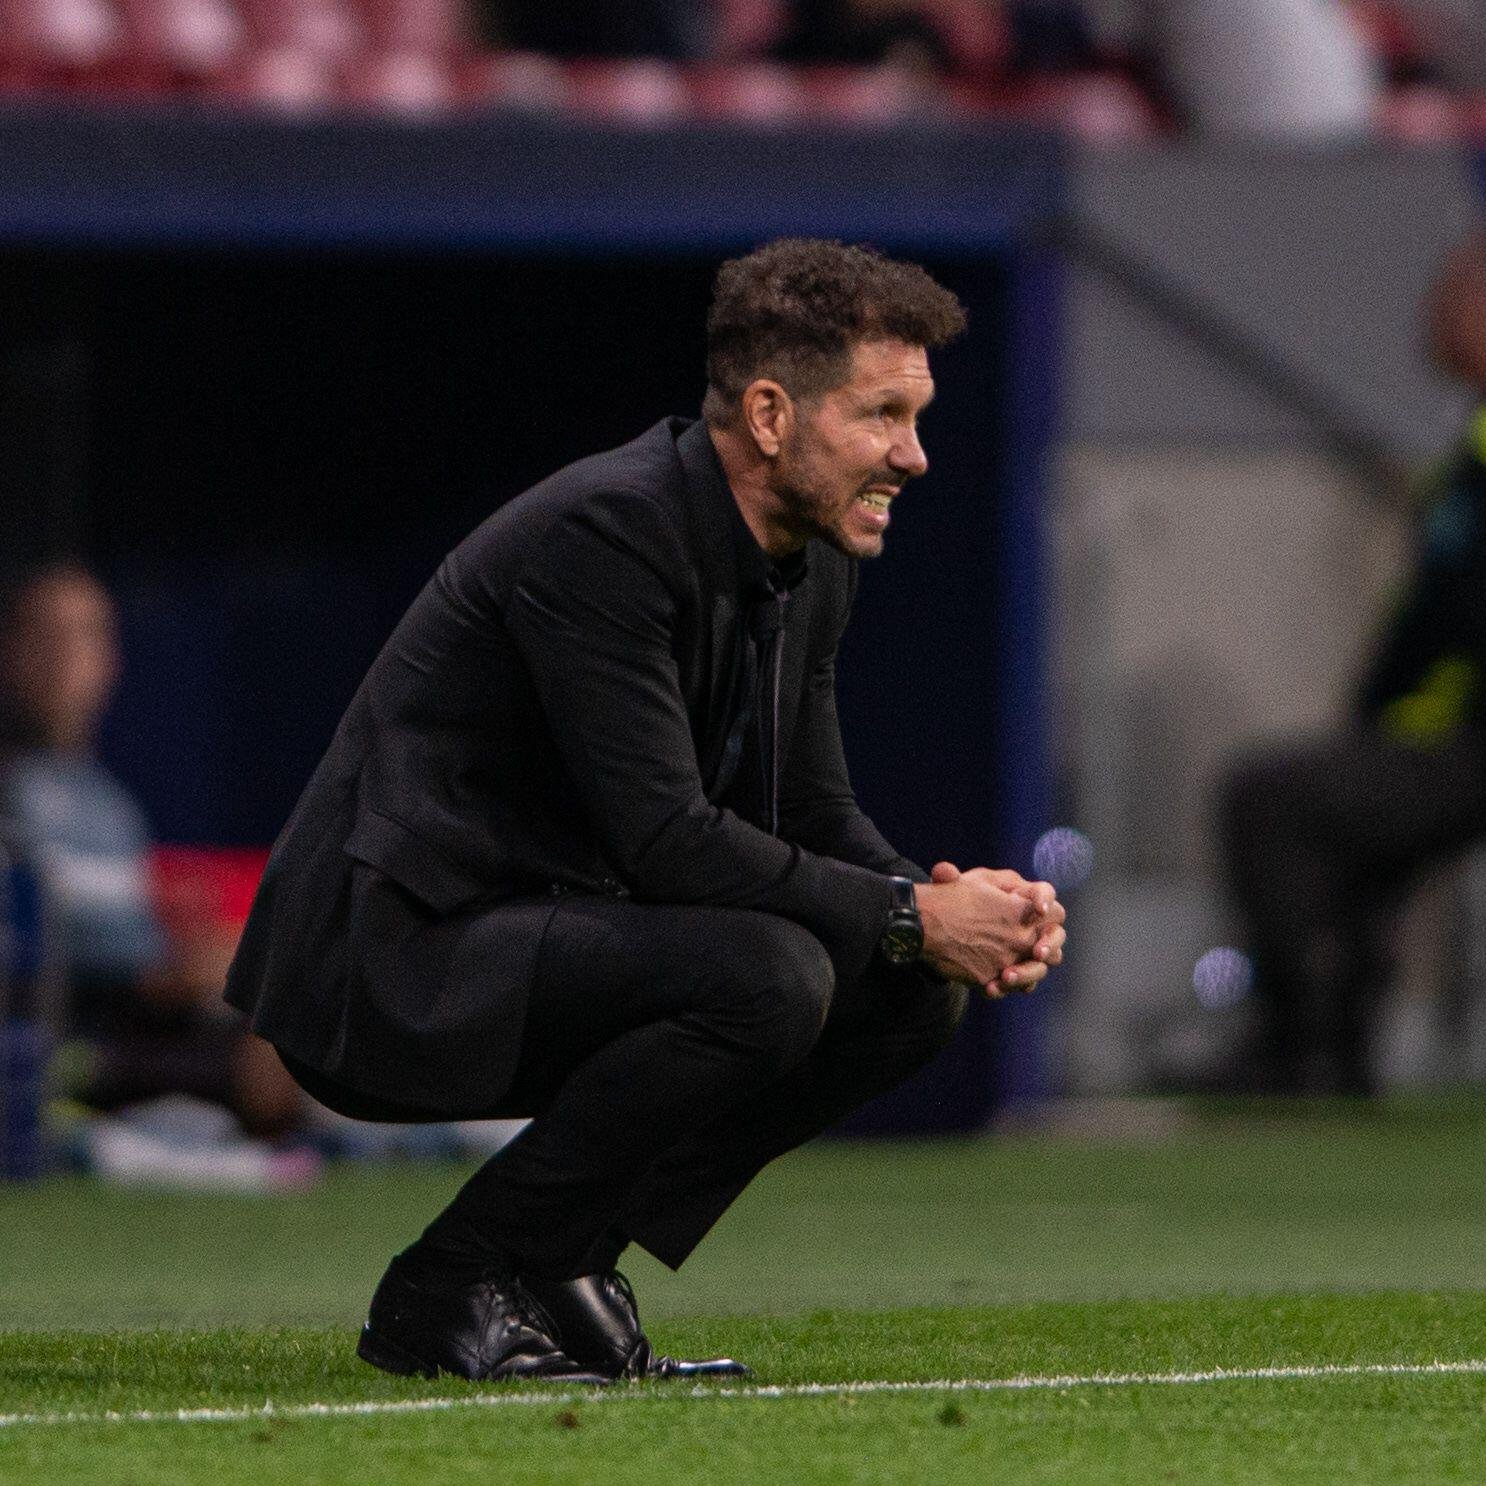 Atletico Madrid halfway to matching remarkable La Liga penalty record